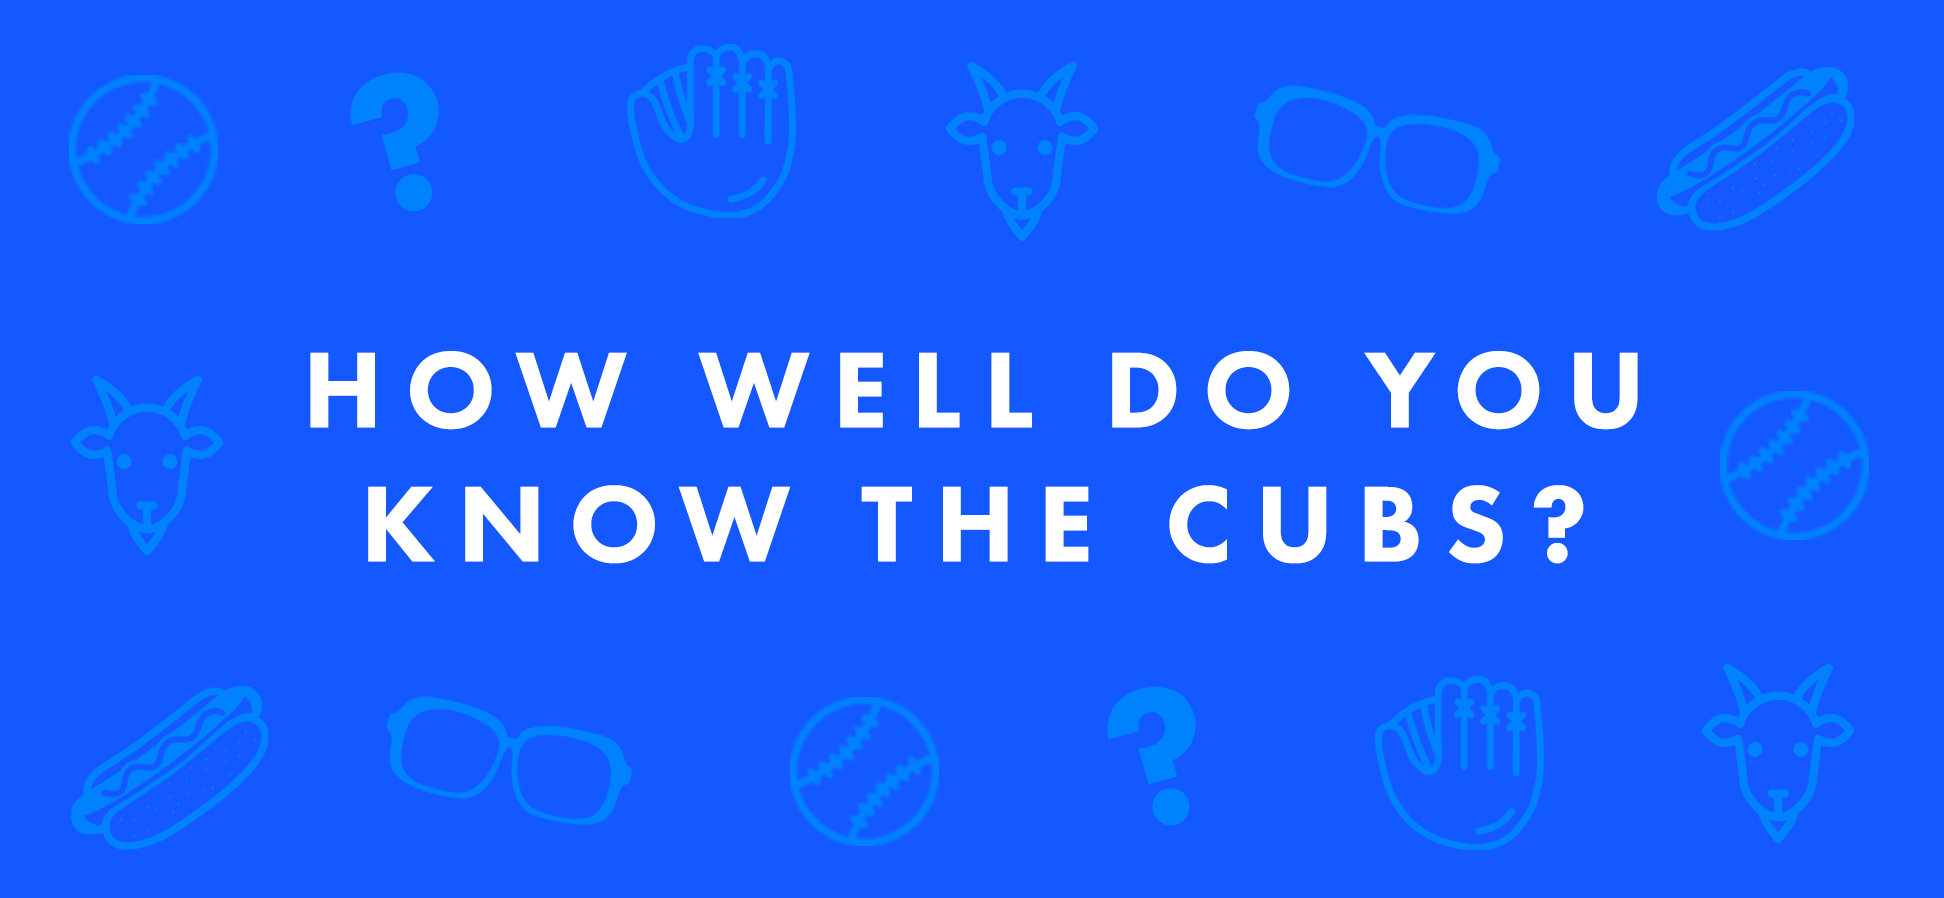 Quiz: How Well Do You Know The Cubs?